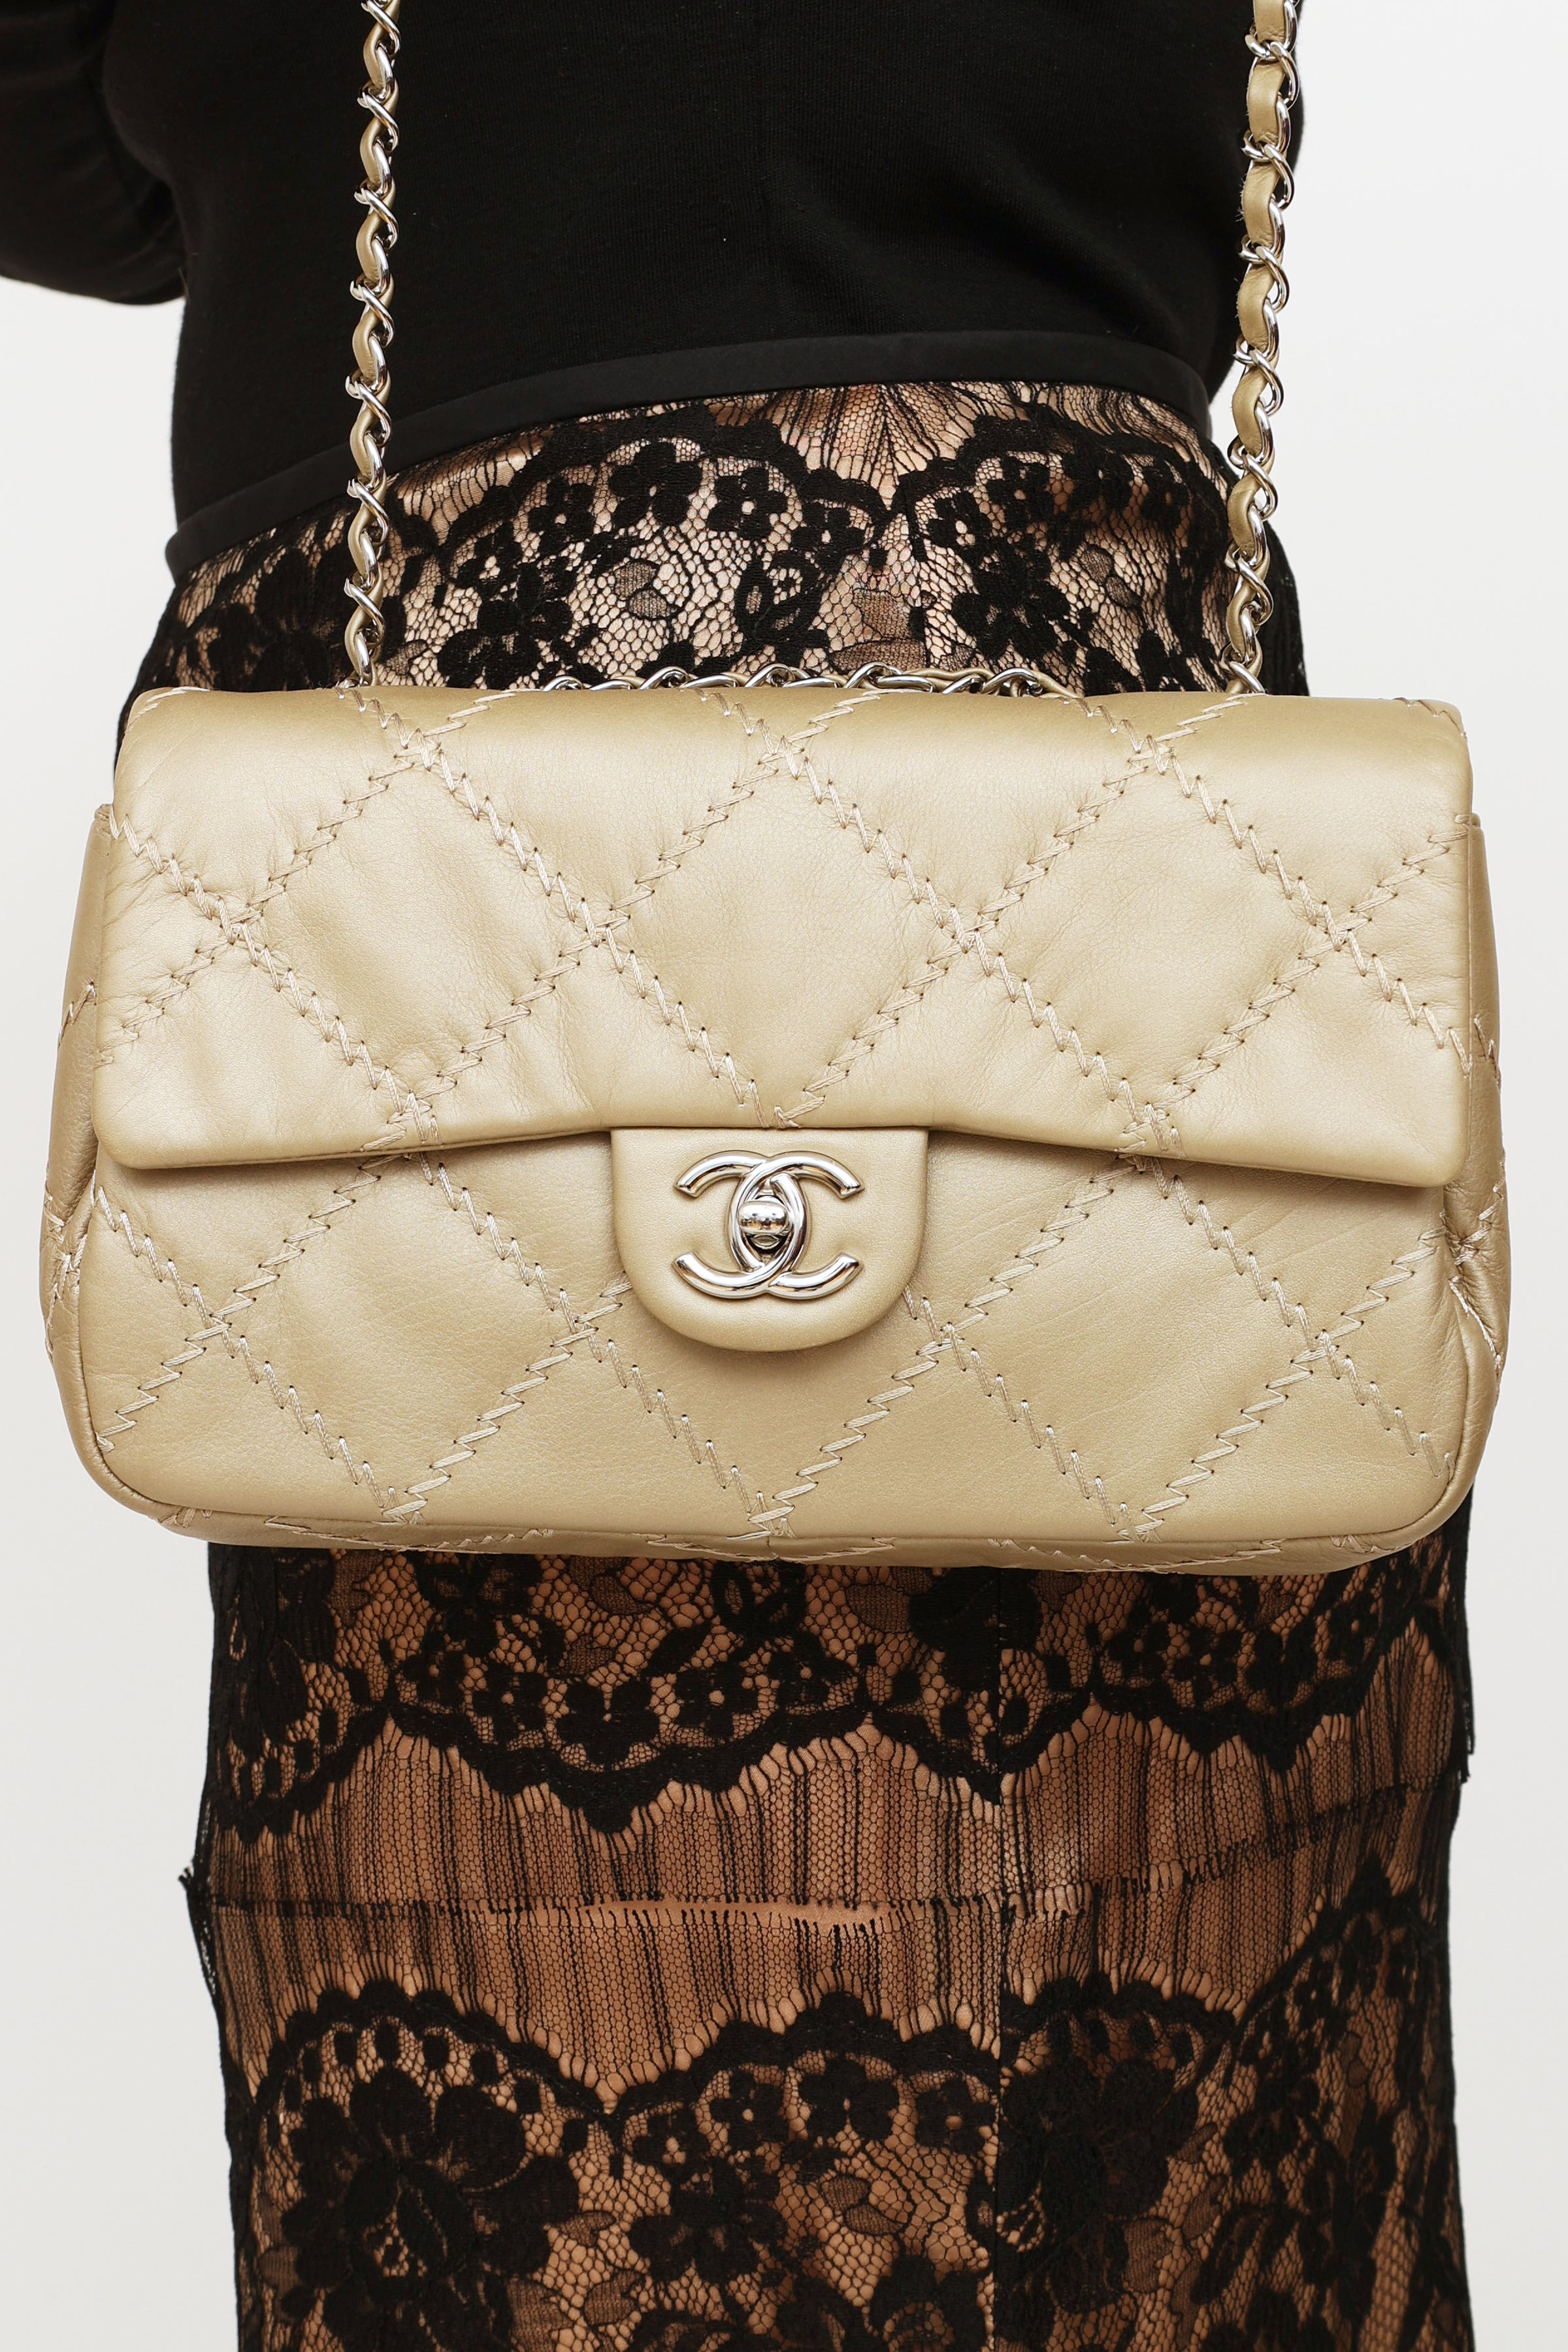 Chanel // 2011 Taupe Wild Stitch Single Flap Shoulder Bag – VSP Consignment